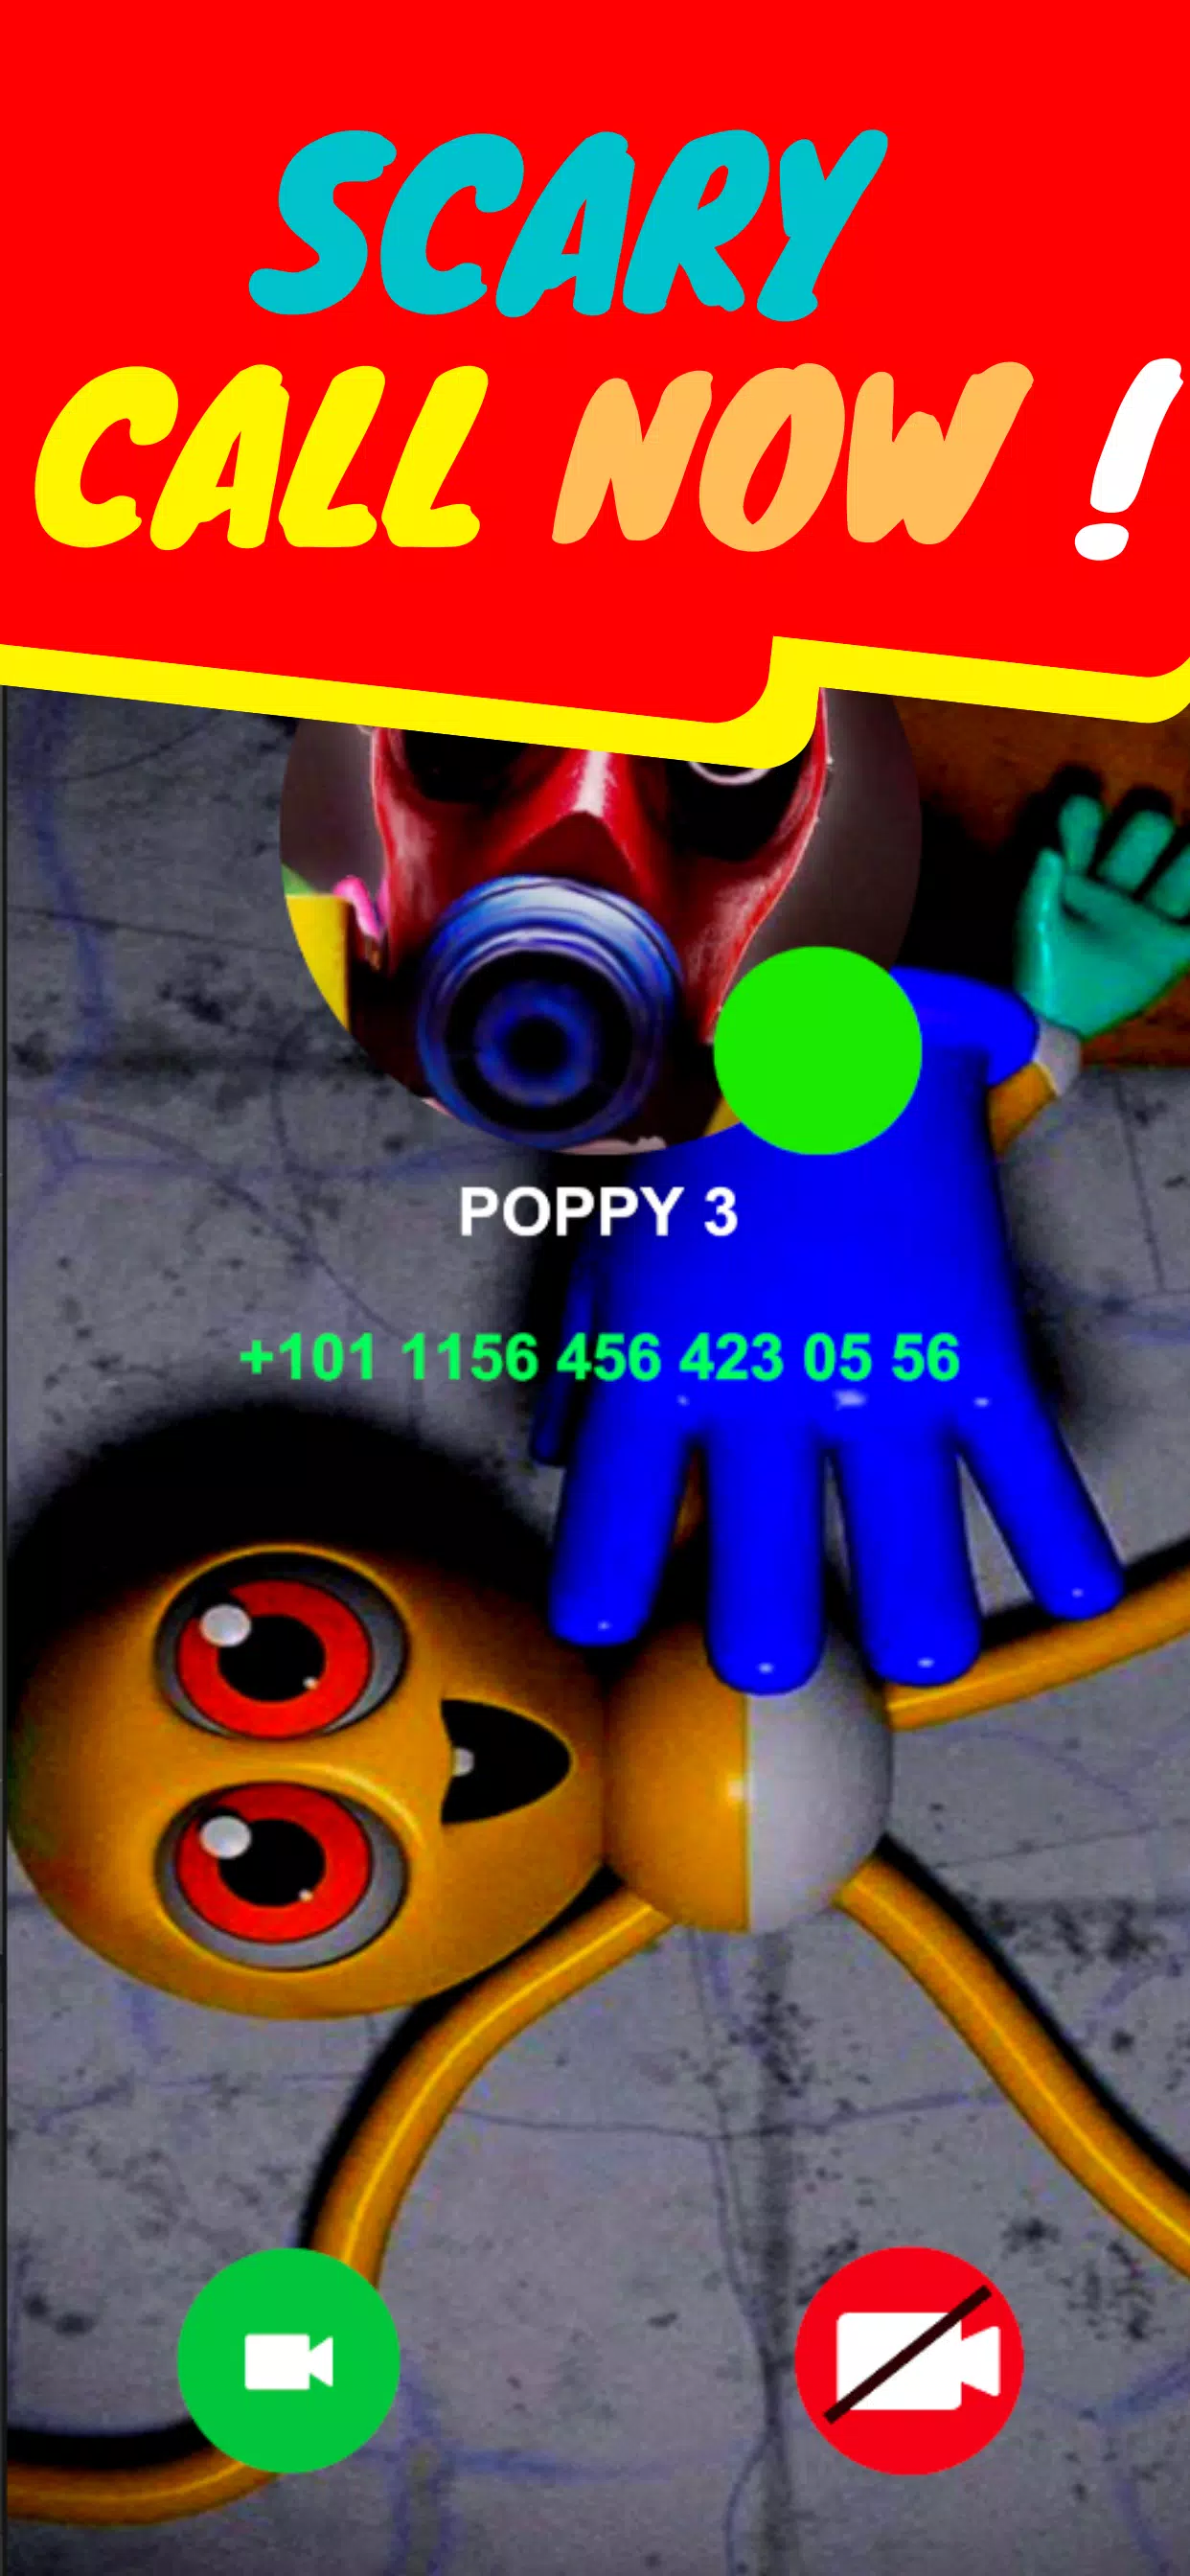 Poppy playtime Chapter 3 scary (MOD_HACK) APK COMPLETO + IOS v1